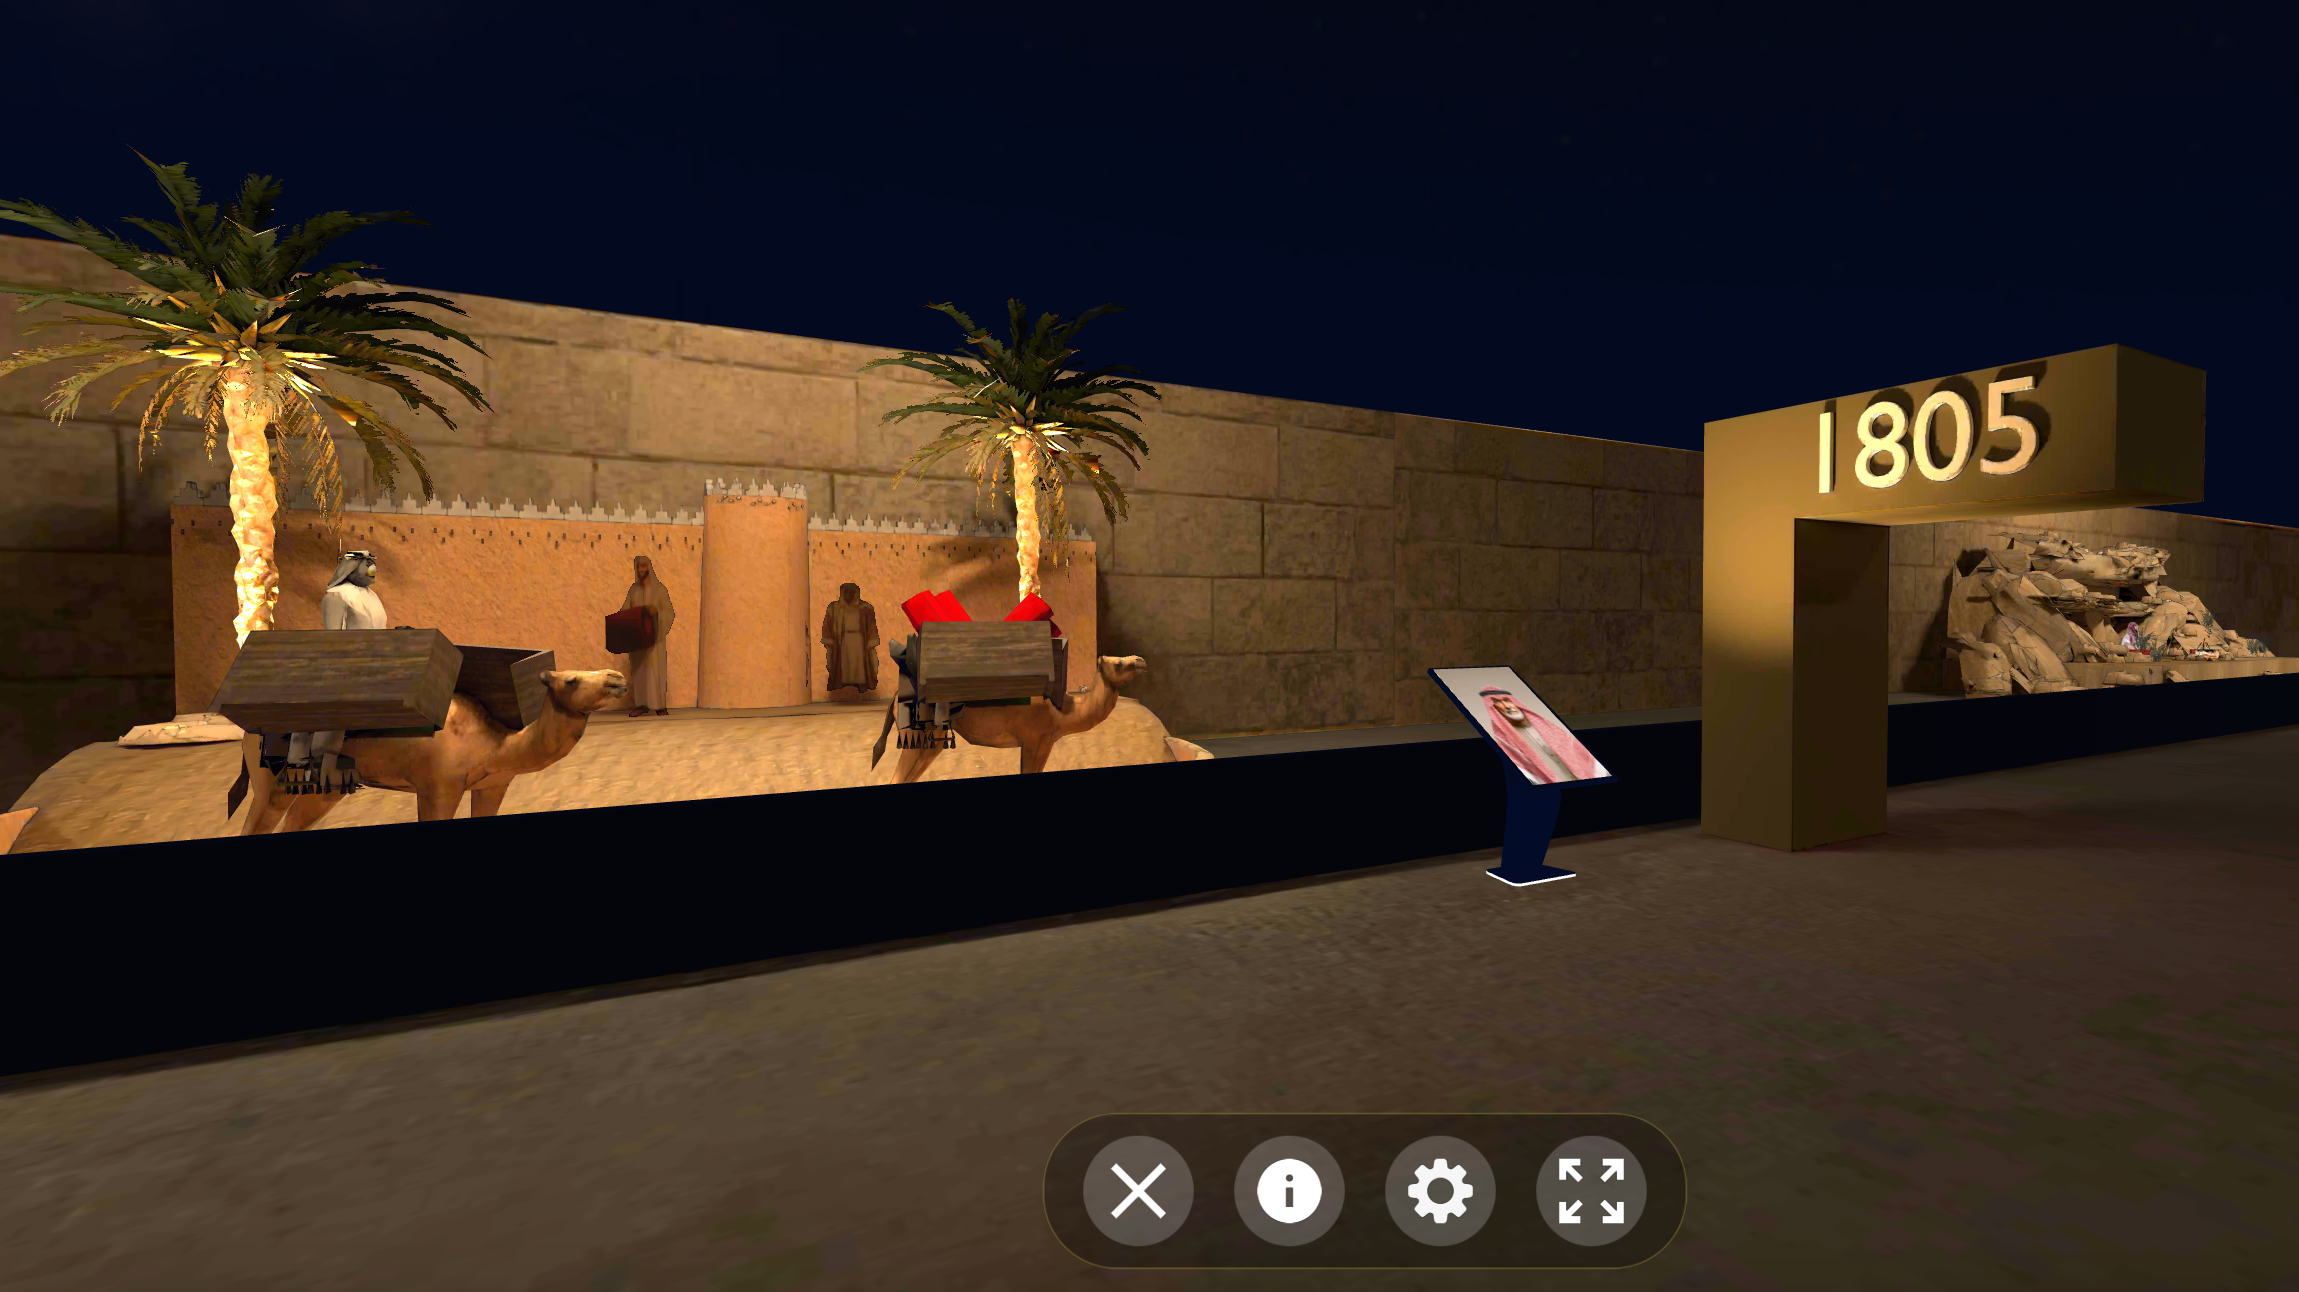 Saudi Arabia launched a game that teaches users about its history and cultural sites. Photo: cup.moc.gov.sa